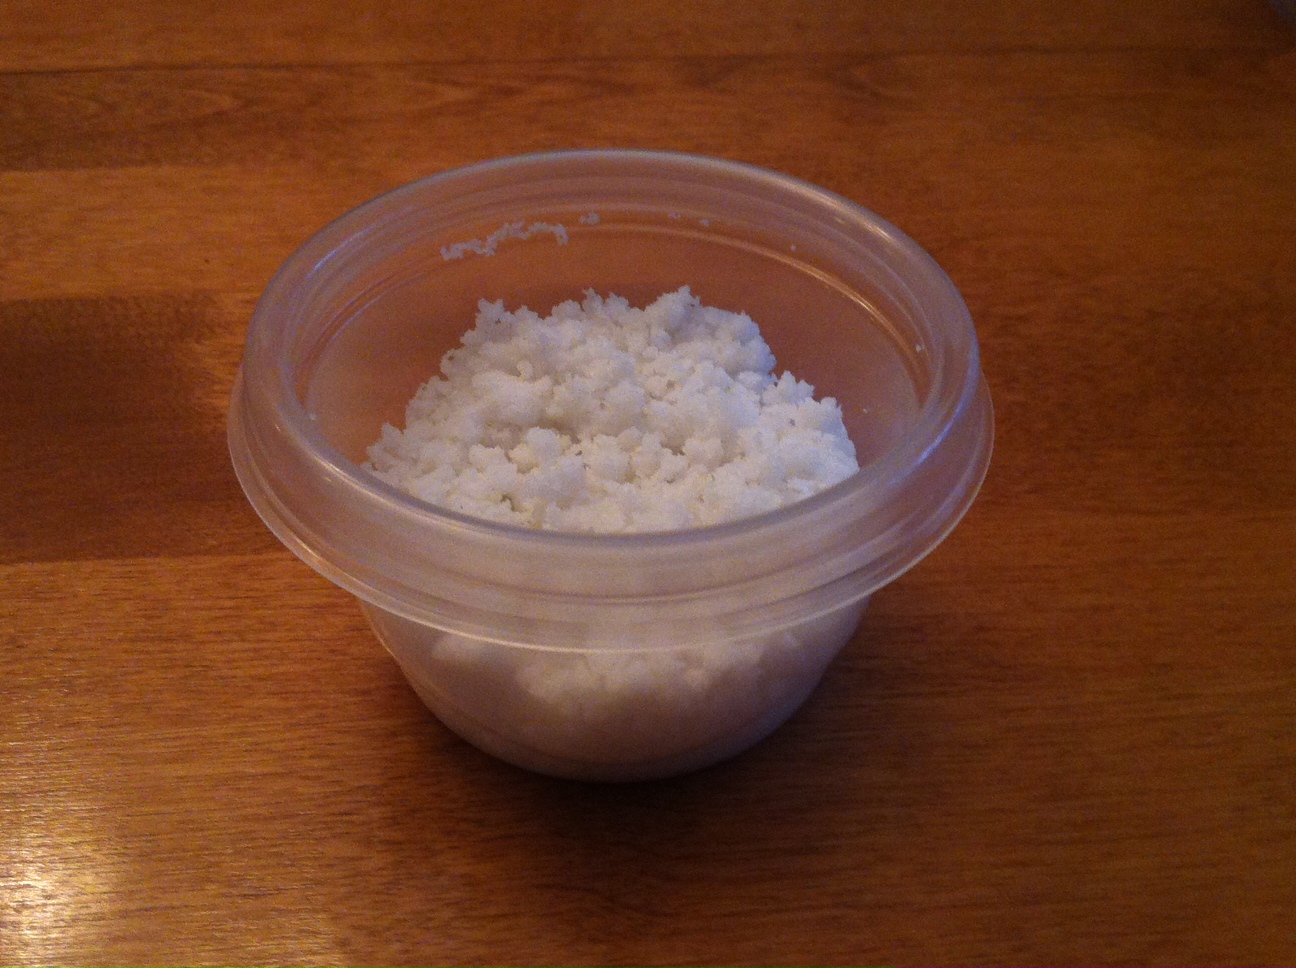  SUCCESS! Salt made by the Richards family!  Photo: Richards family  